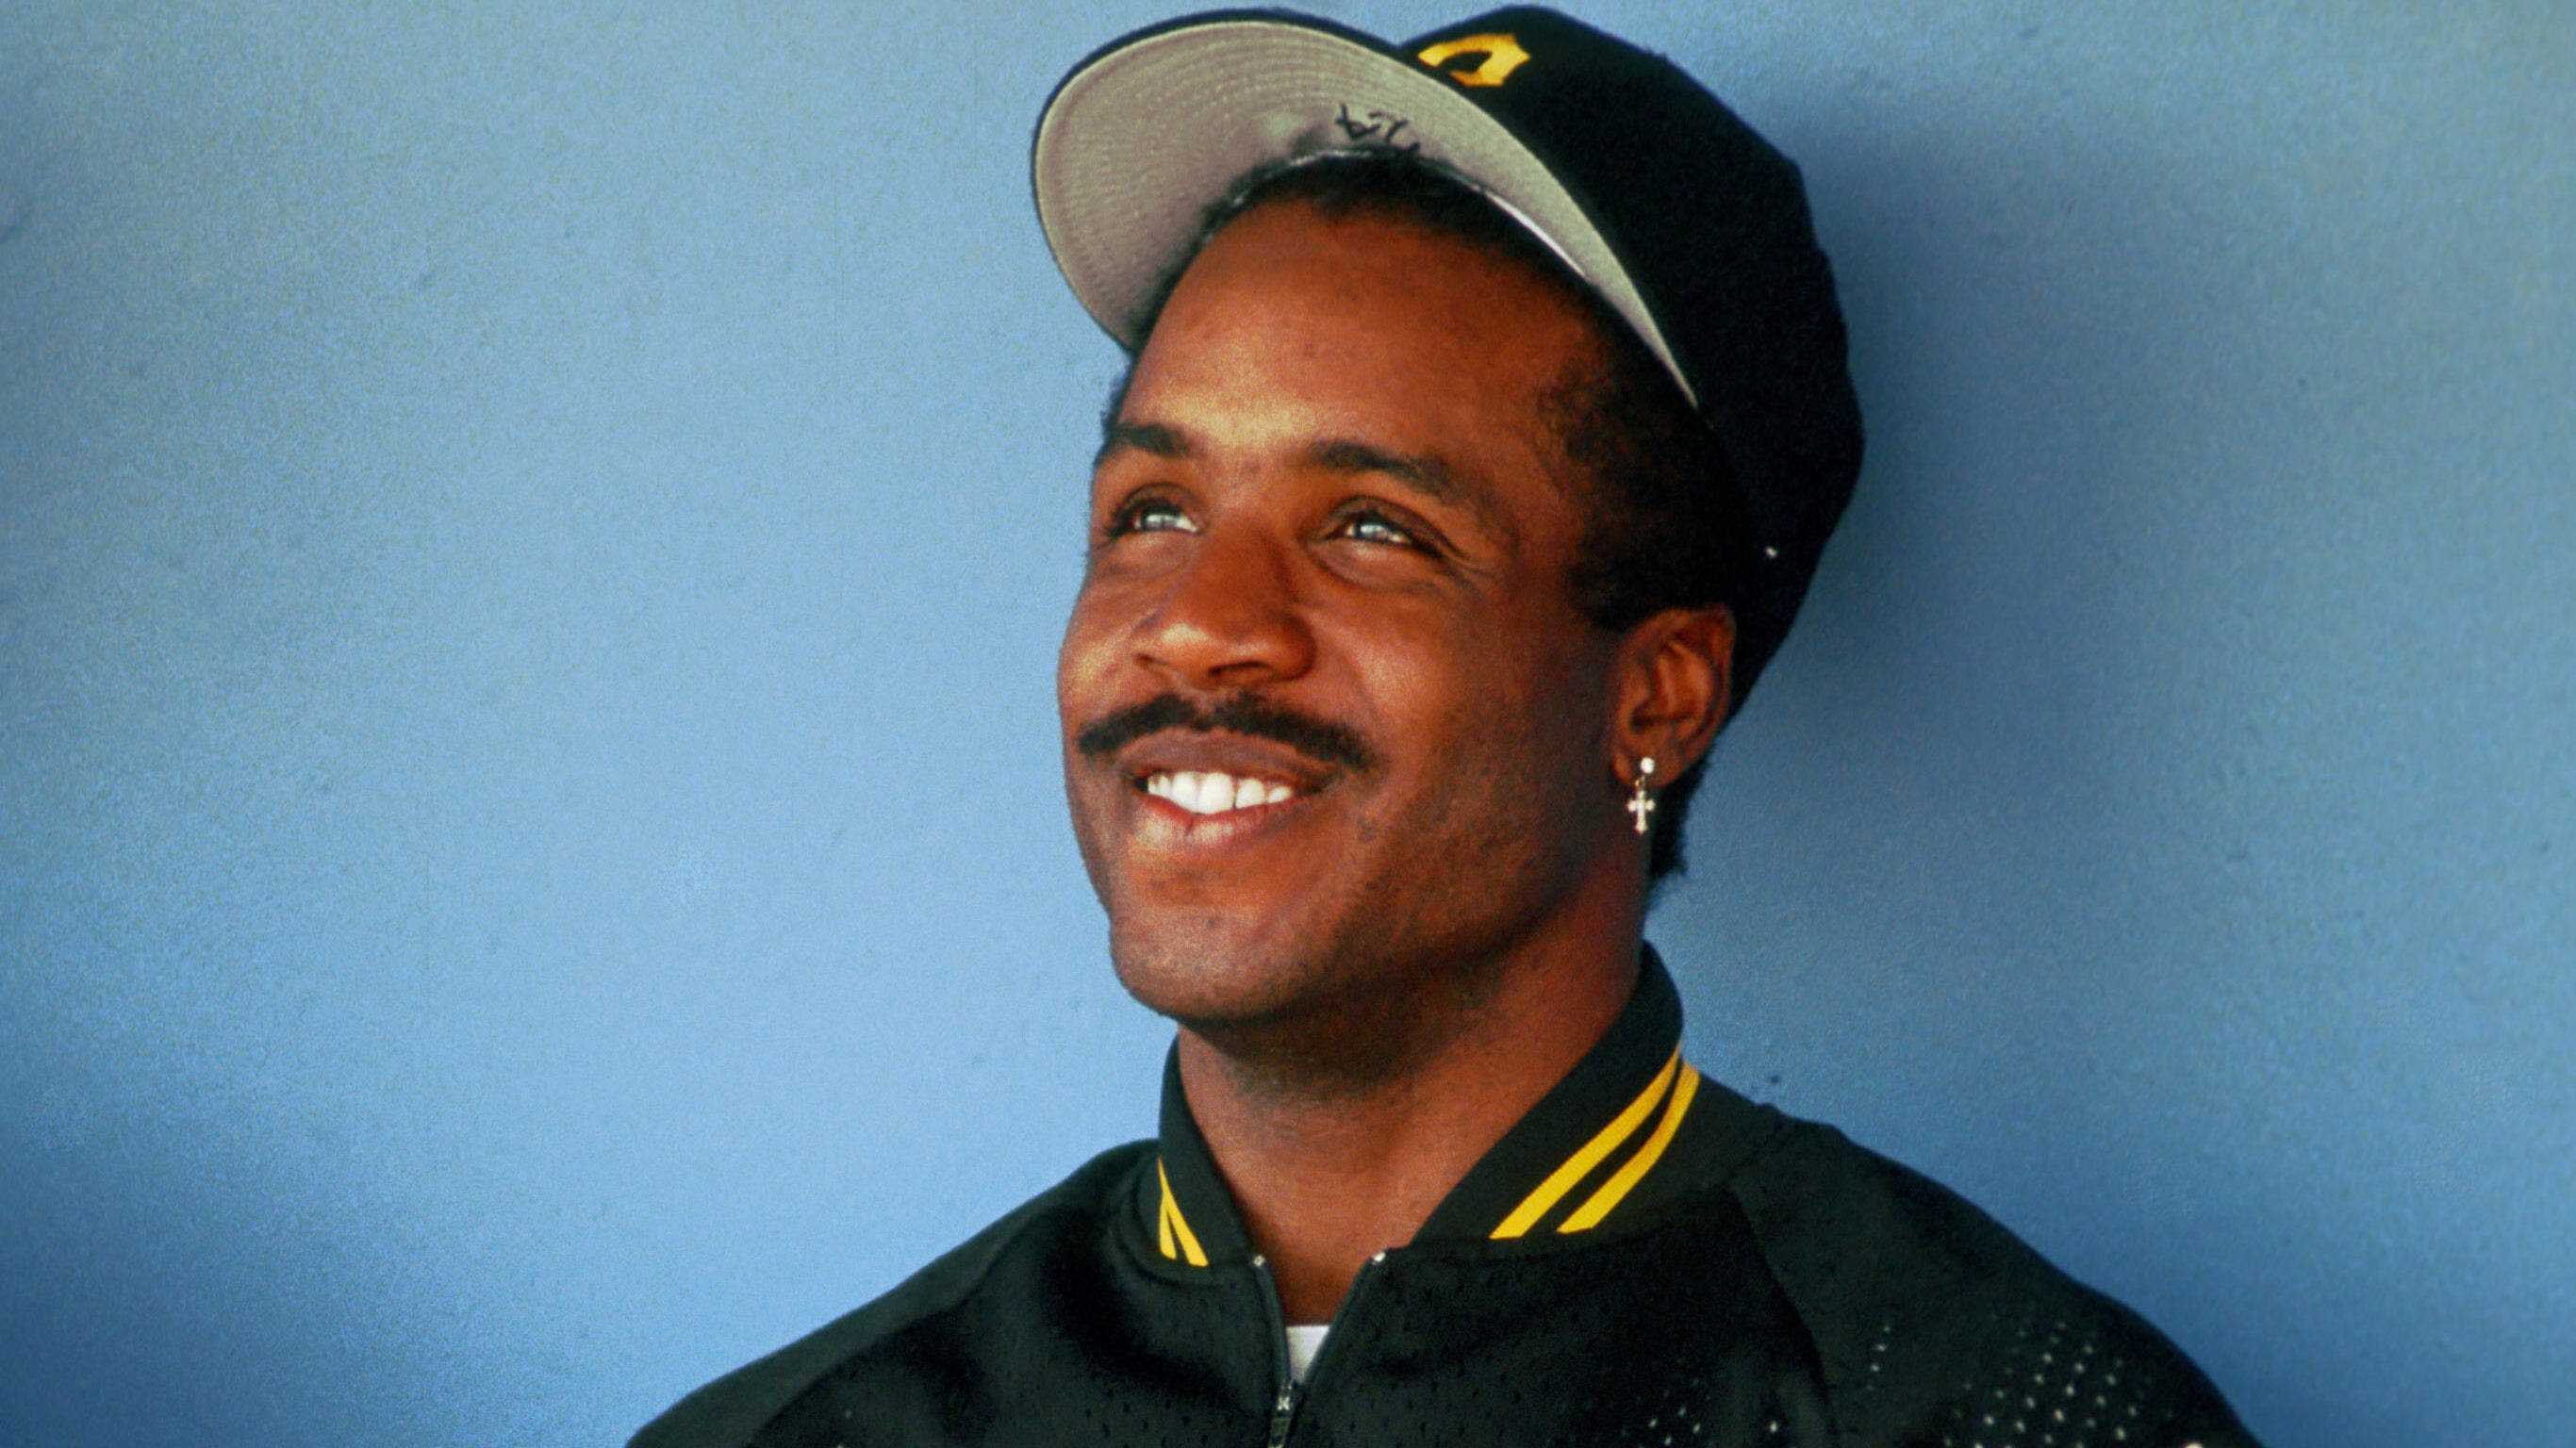 Barry Bonds, former manager Jim Leyland part of Pittsburgh Pirates' 2024 Hall of Fame class